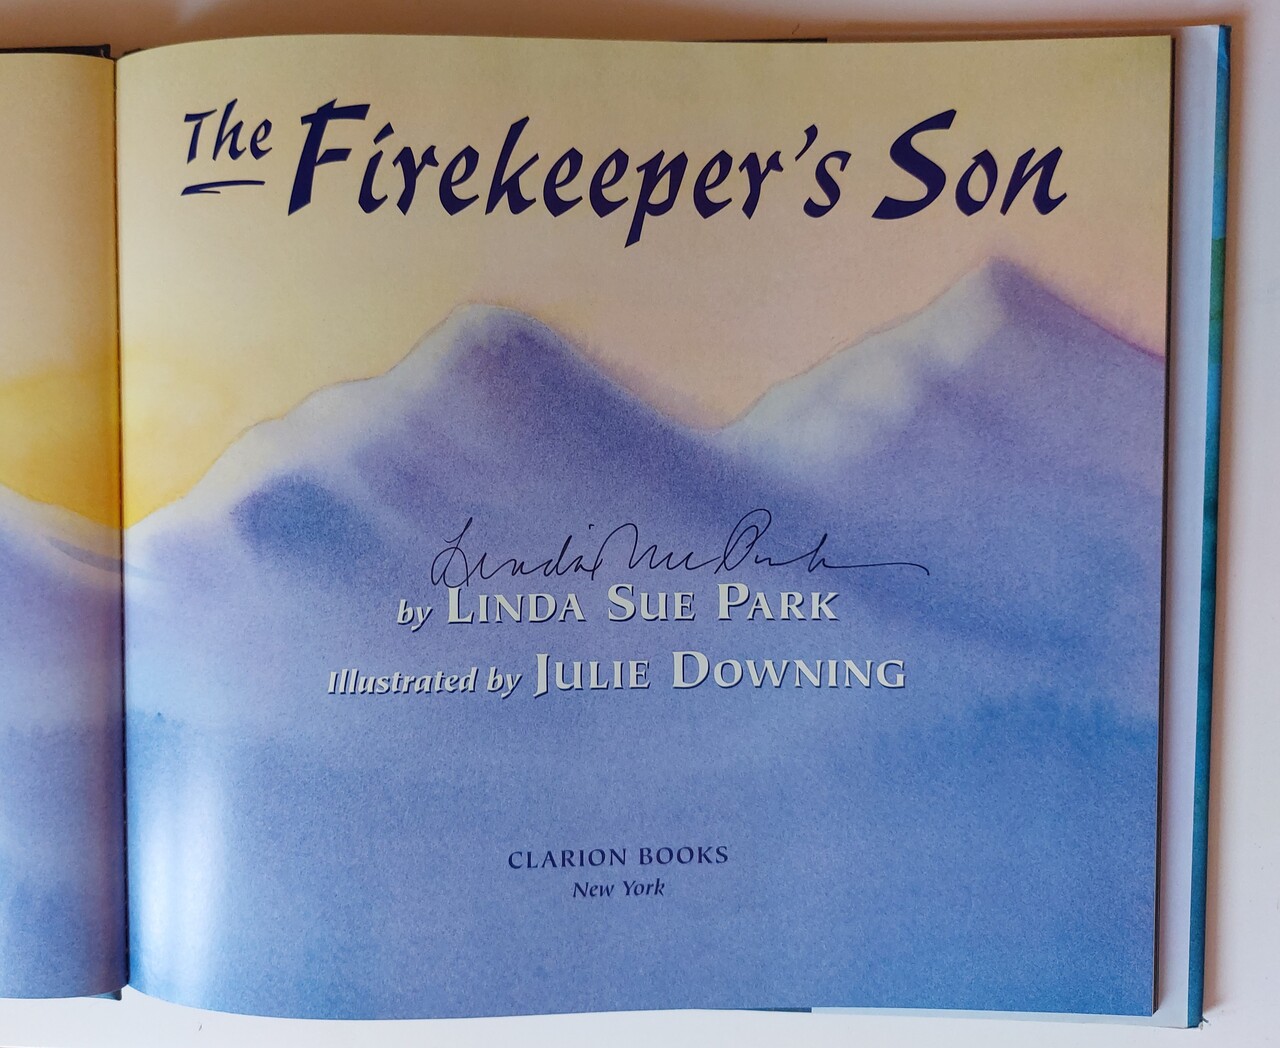 The-Firekeeper-s-Son-signed-by-Linda-Sue-Park.jpg